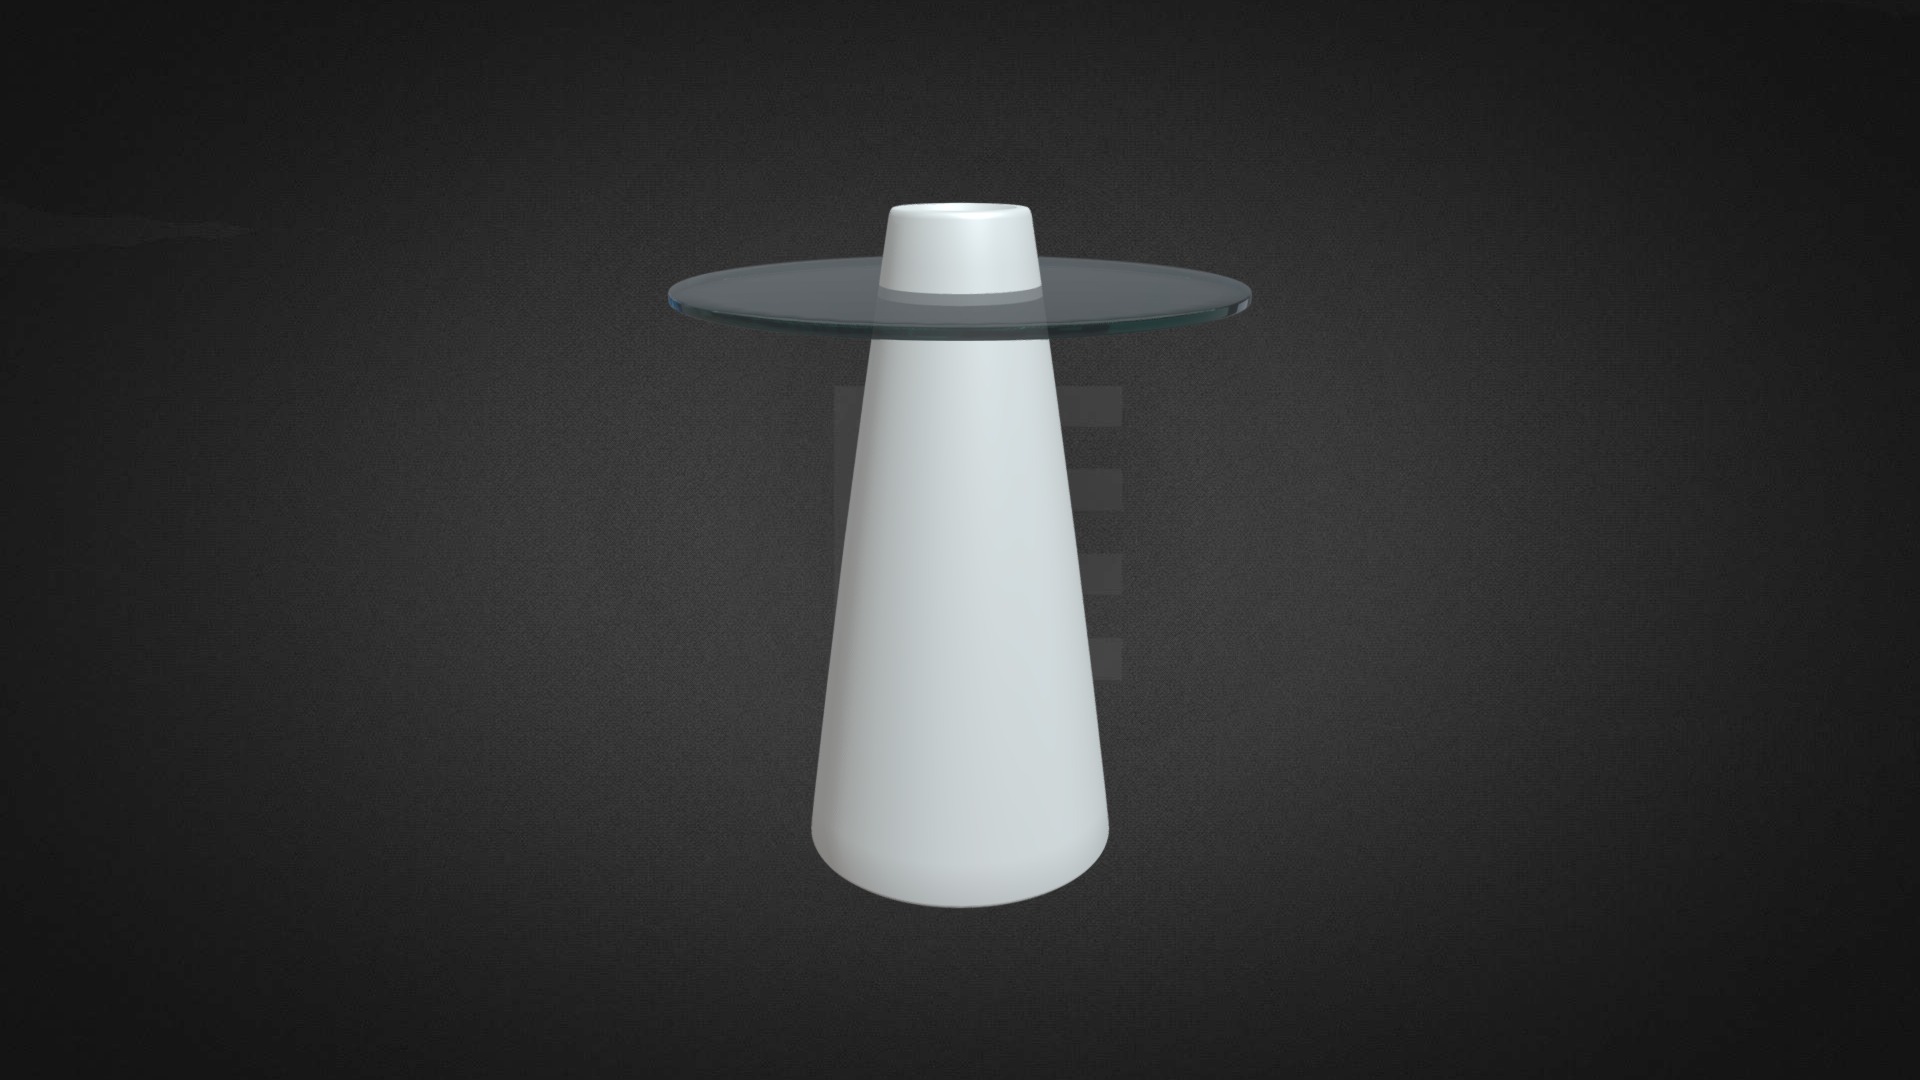 3D model Peak Dining LED Hire - This is a 3D model of the Peak Dining LED Hire. The 3D model is about a white cylindrical object.